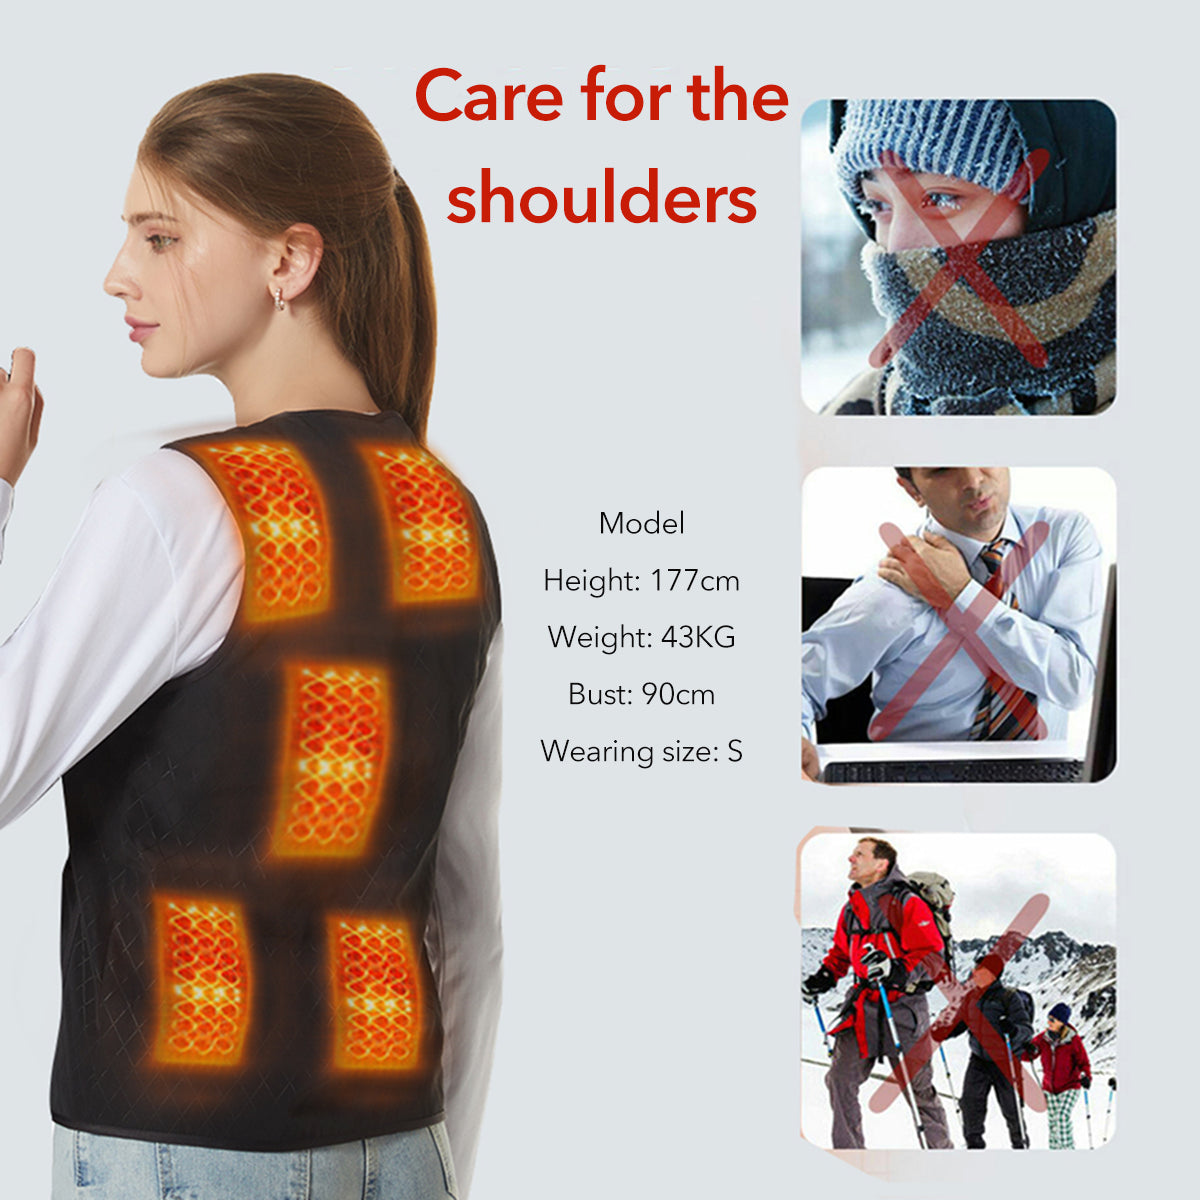 5-Heating Pad Heated USB Warm Up Electric Winter Vest Jacket